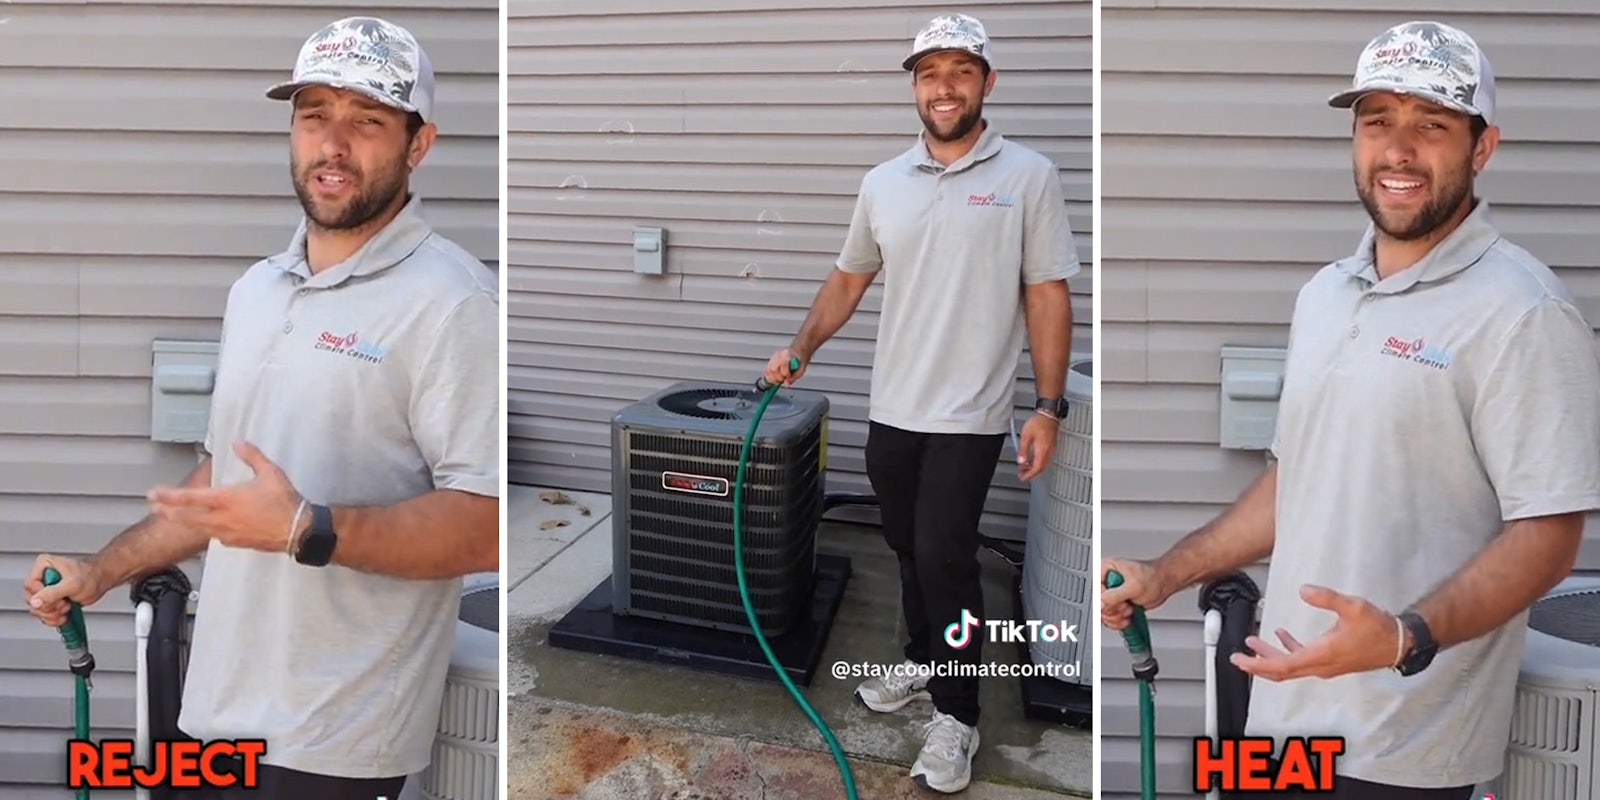 man with garden hose and caption 'reject' (l) man with hose near air conditioner unit (c) man with garden hose and caption 'heat' (r)